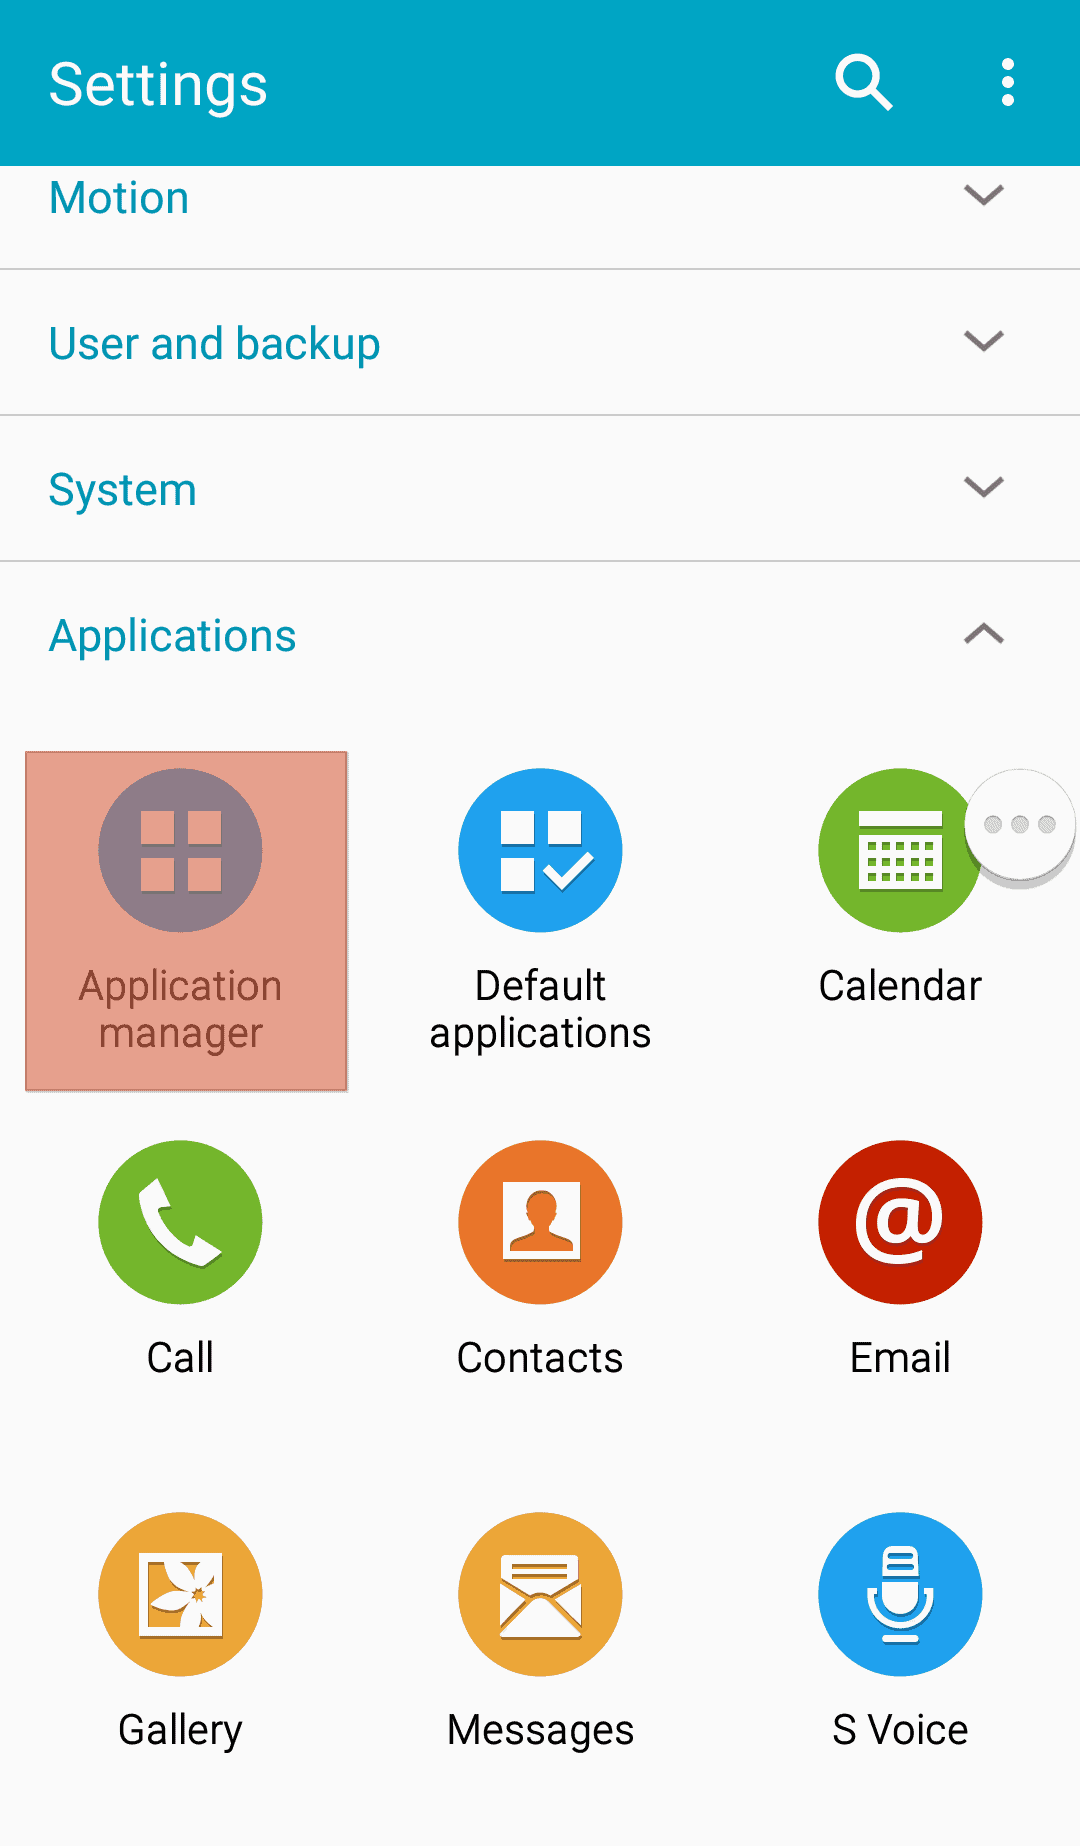 Settings Application Manager